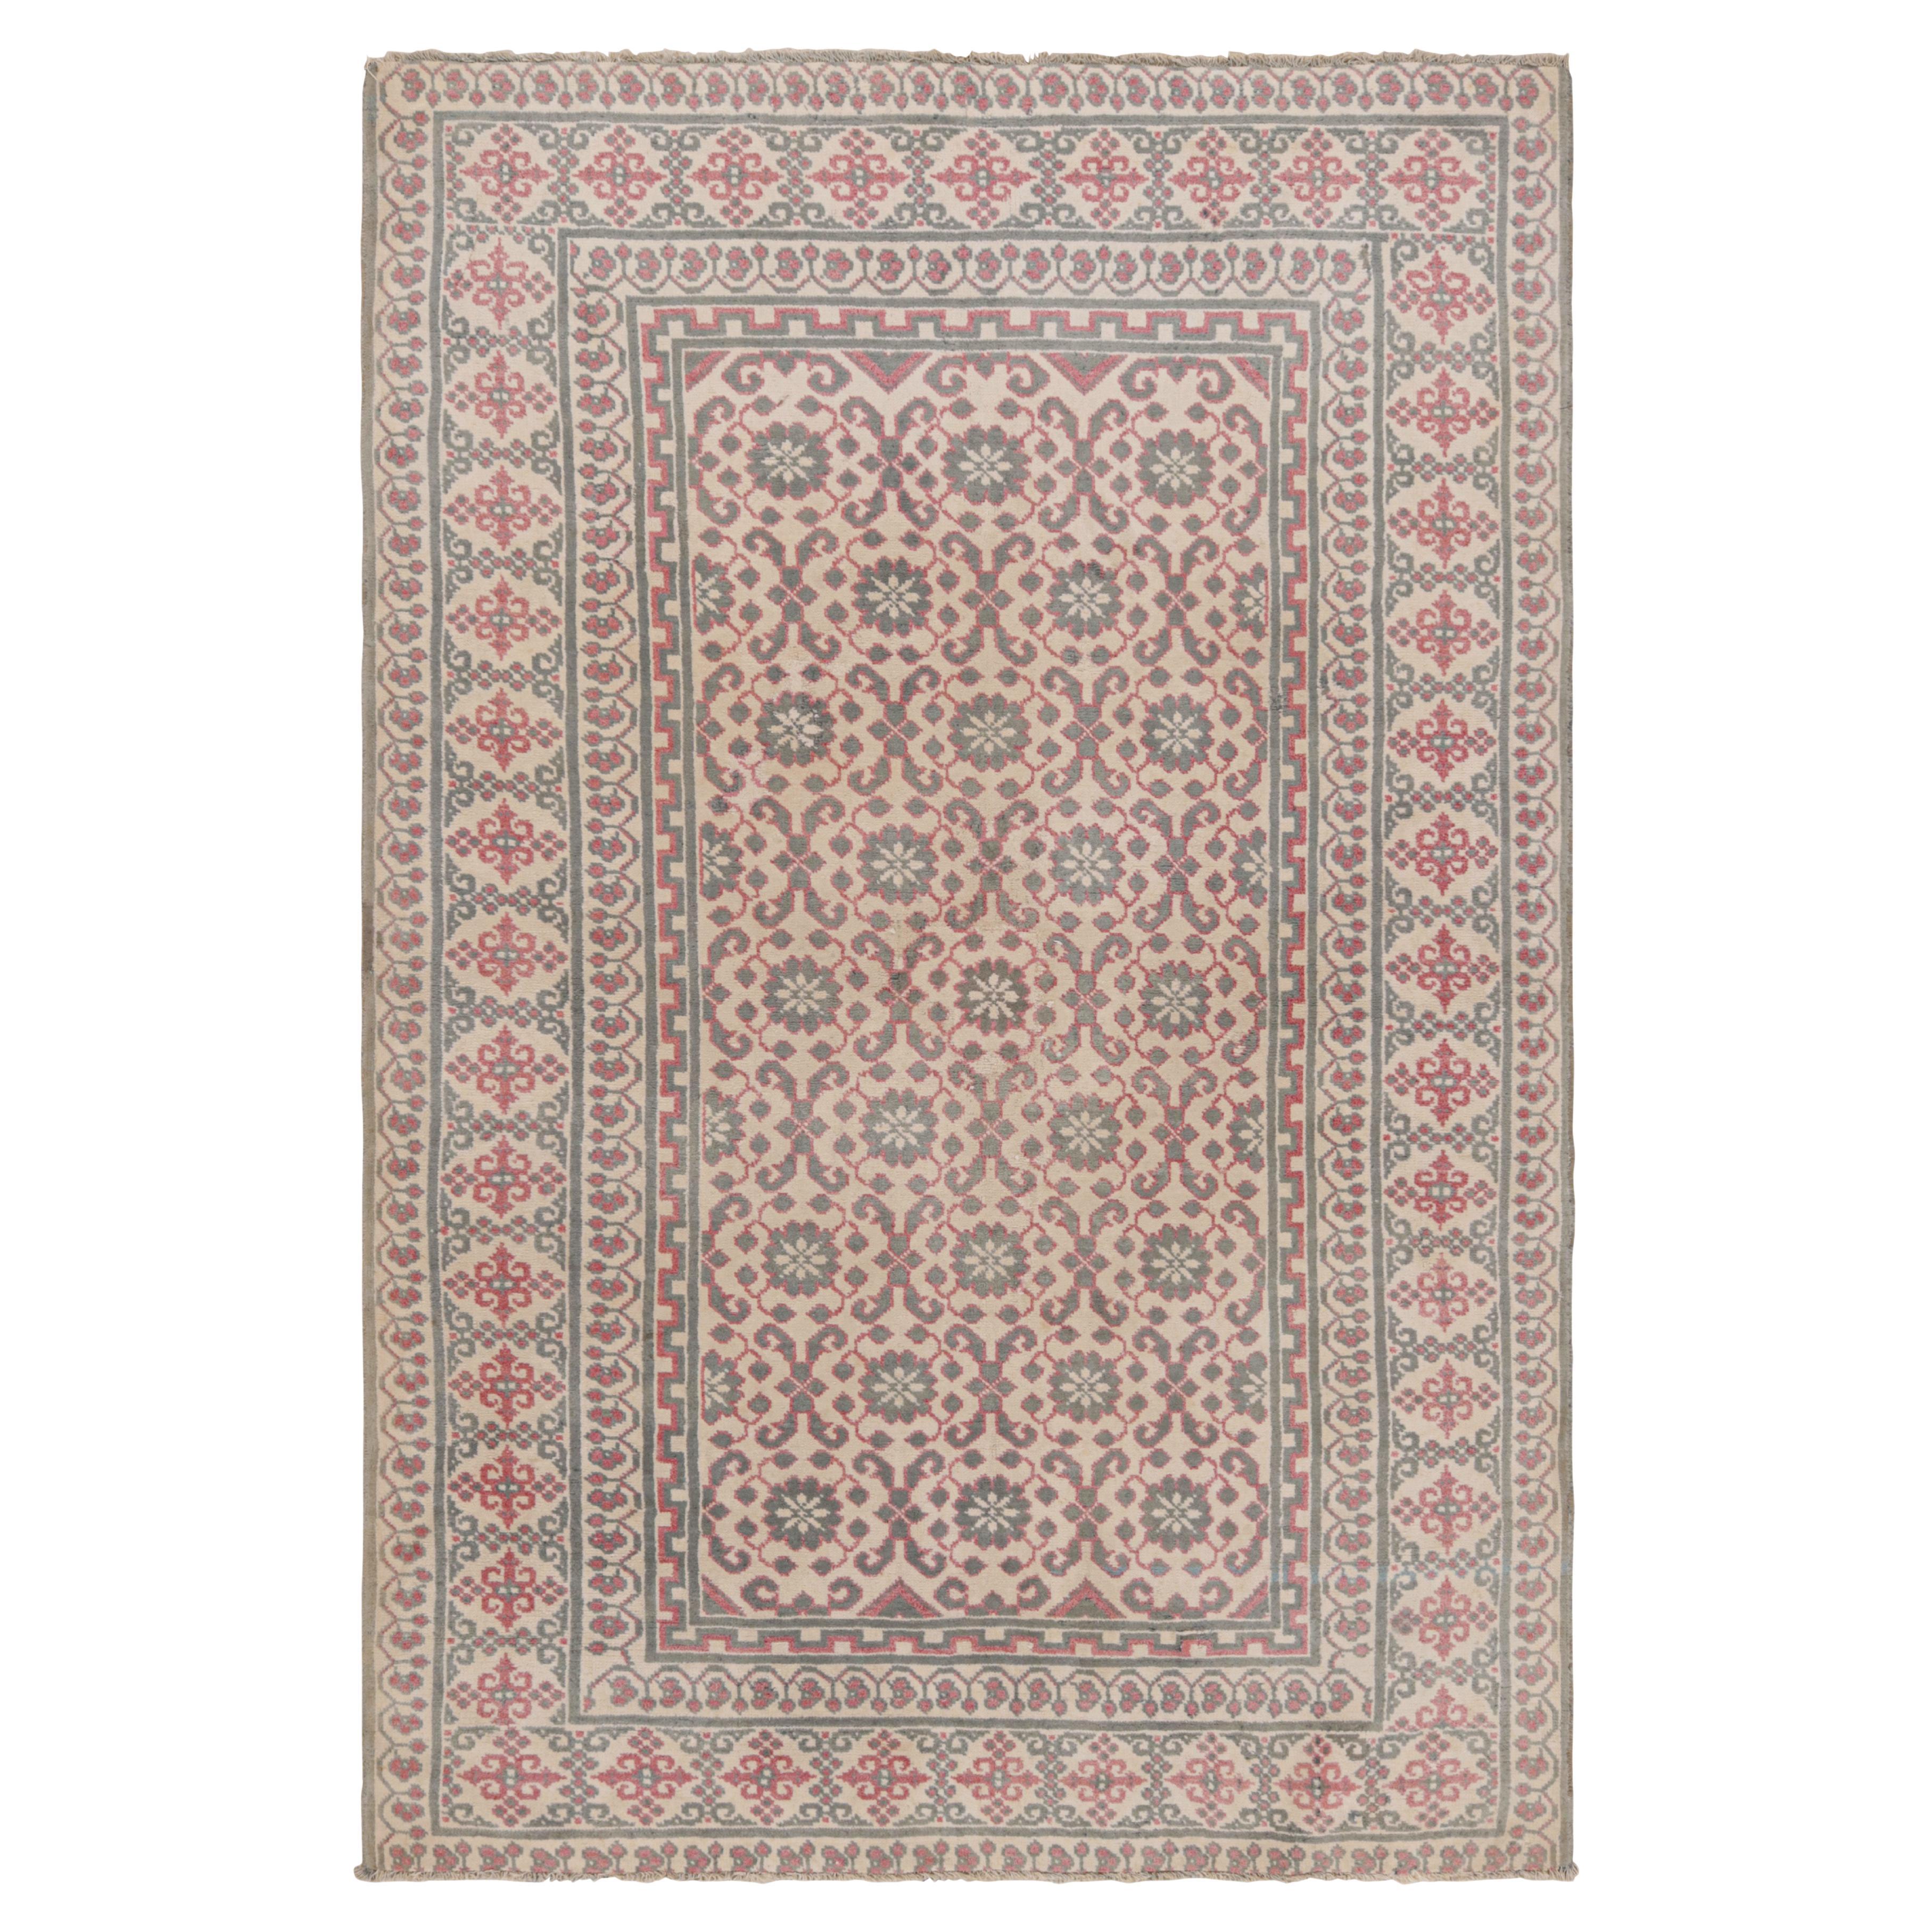 Antique Agra Rug in Cream with Gray and Red Floral Patterns, from Rug & Kilim